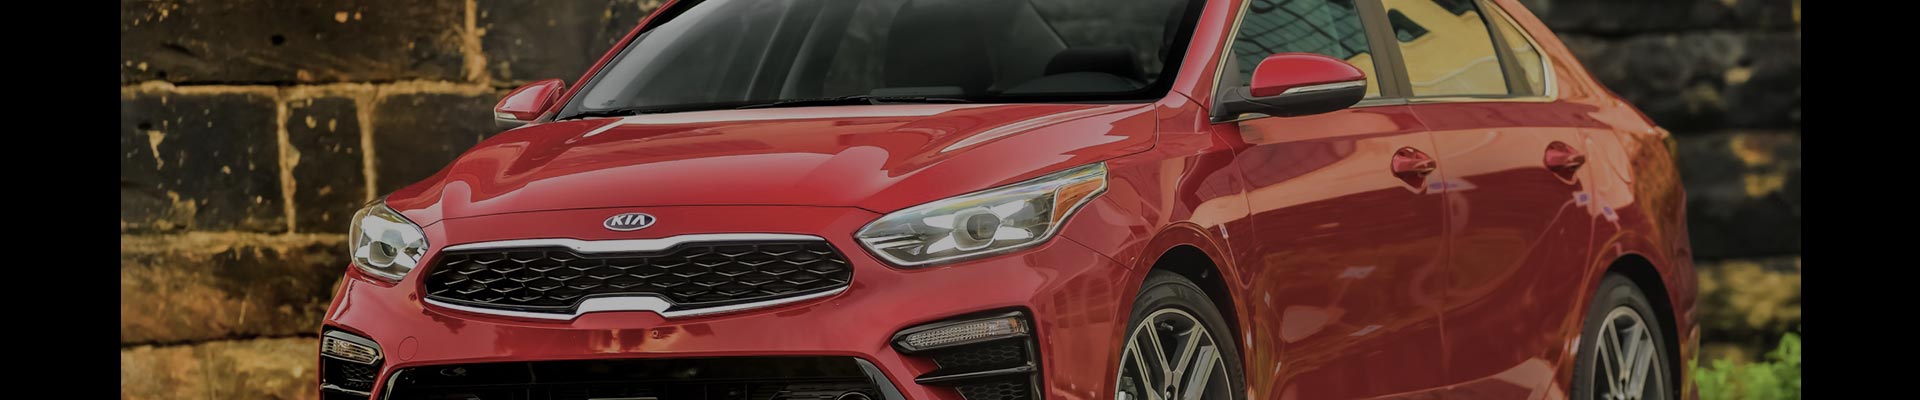 Shop Replacement and OEM 2019 Kia Forte Parts with Discounted Price on the Net